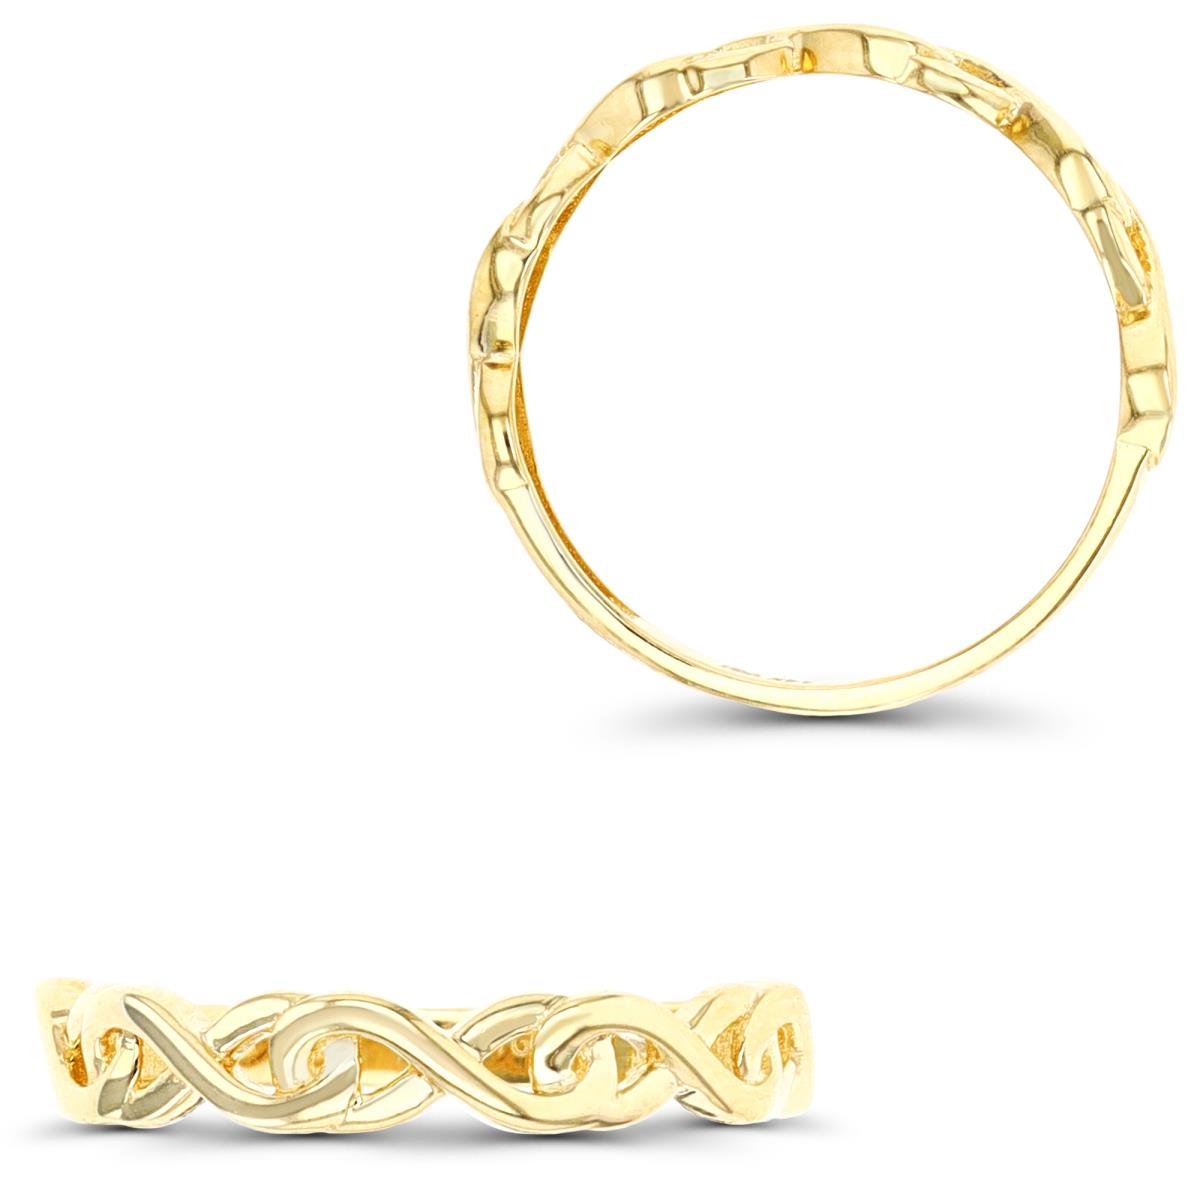 10K Yellow Gold 3.8mm Polished Infinity Band Ring